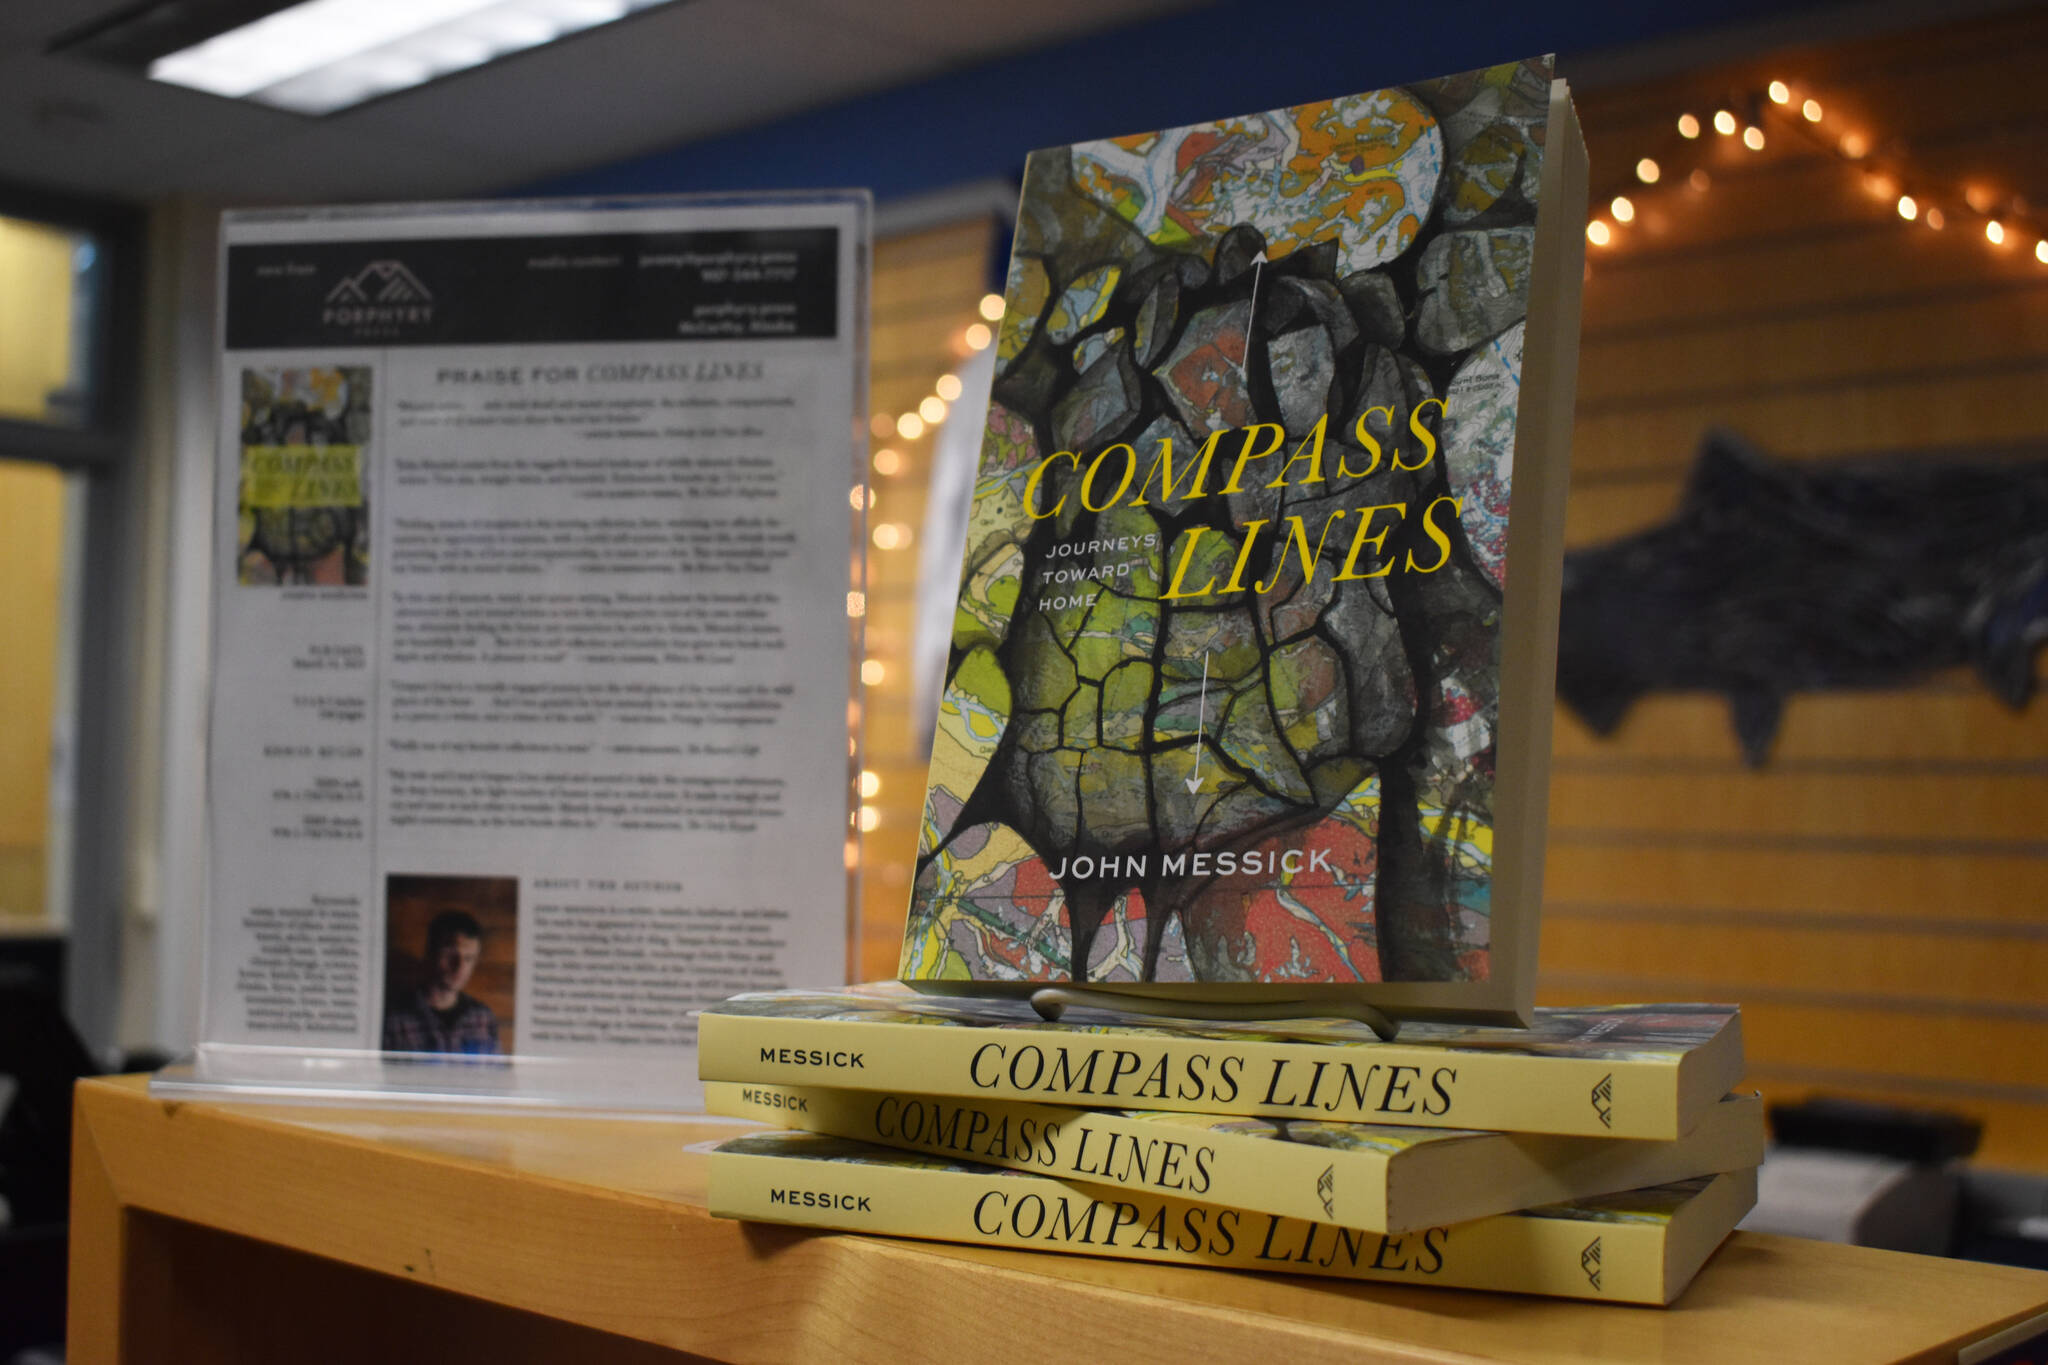 John Messick’s “Compass Lines” is displayed at the Kenai Peninsula College Bookstore in Soldotna, Alaska on Tuesday, March 28, 2023. (Jake Dye/Peninsula Clarion)